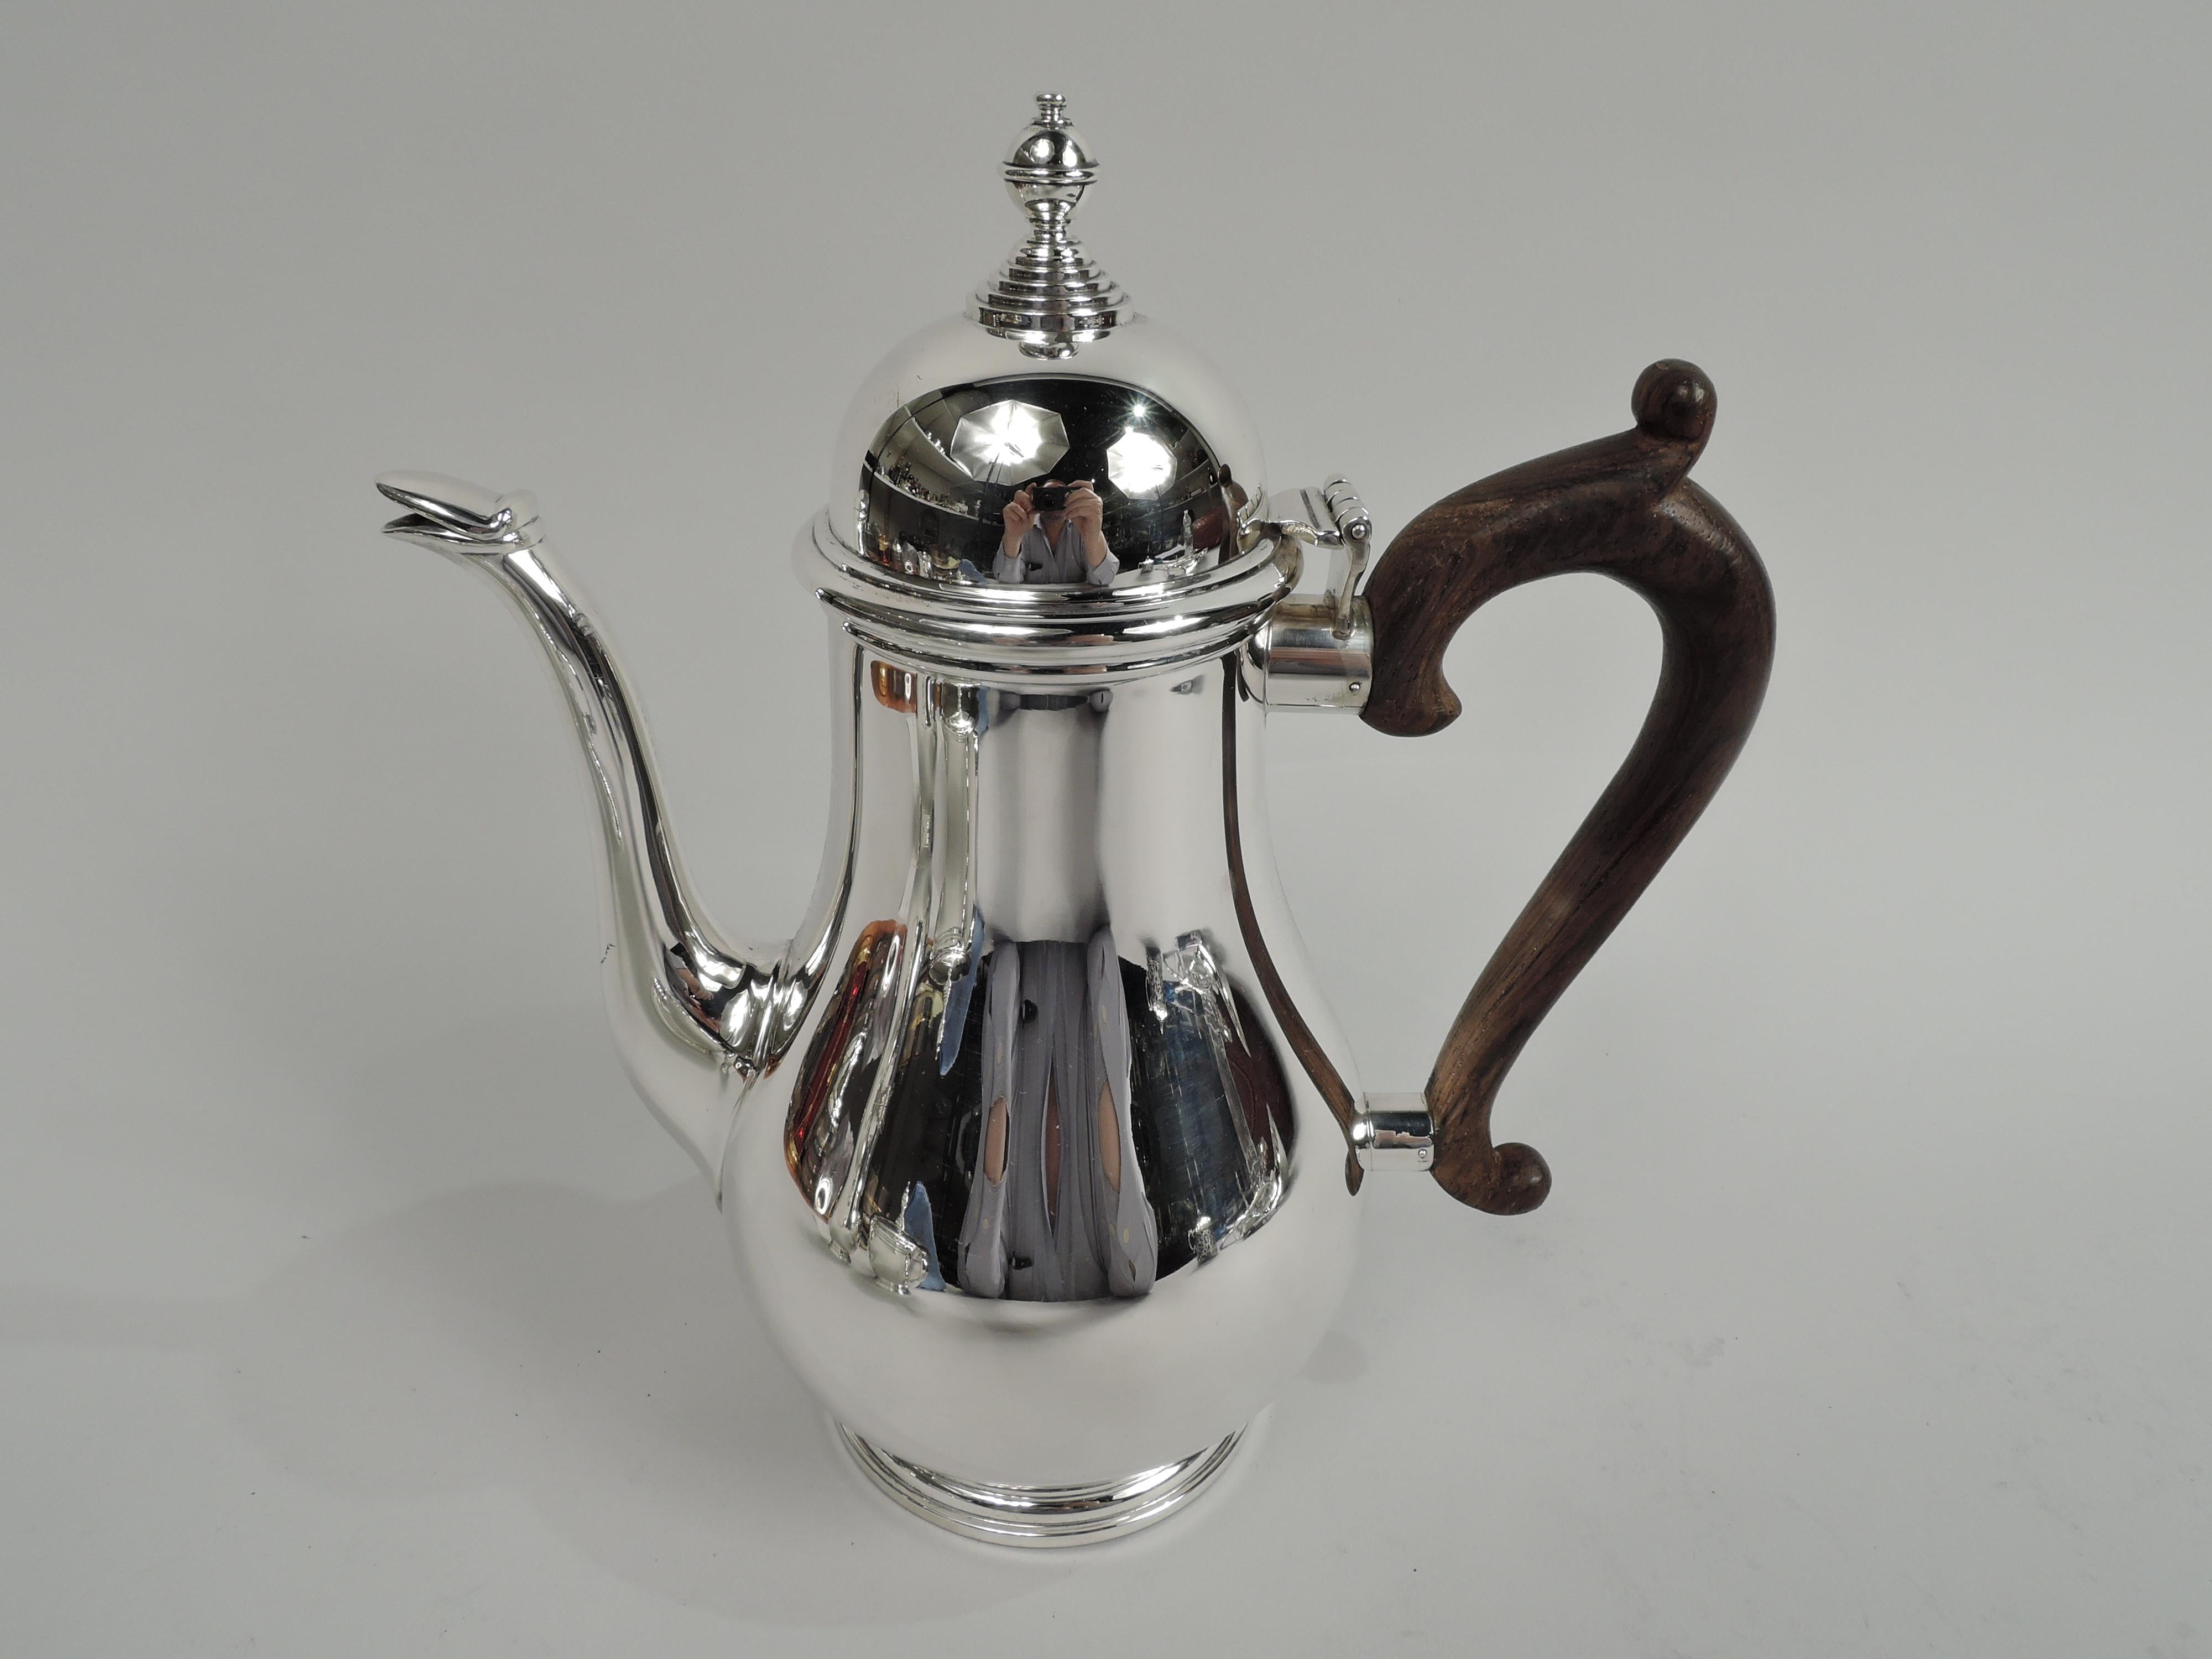 George I-pattern sterling silver coffee set. Made by Gorham in Providence in 1956. This set comprises 3 pieces: coffeepot, creamer, and sugar. Georgian forms with baluster bodies (coffeepot and creamer), round and stepped foot, and vasiform finials